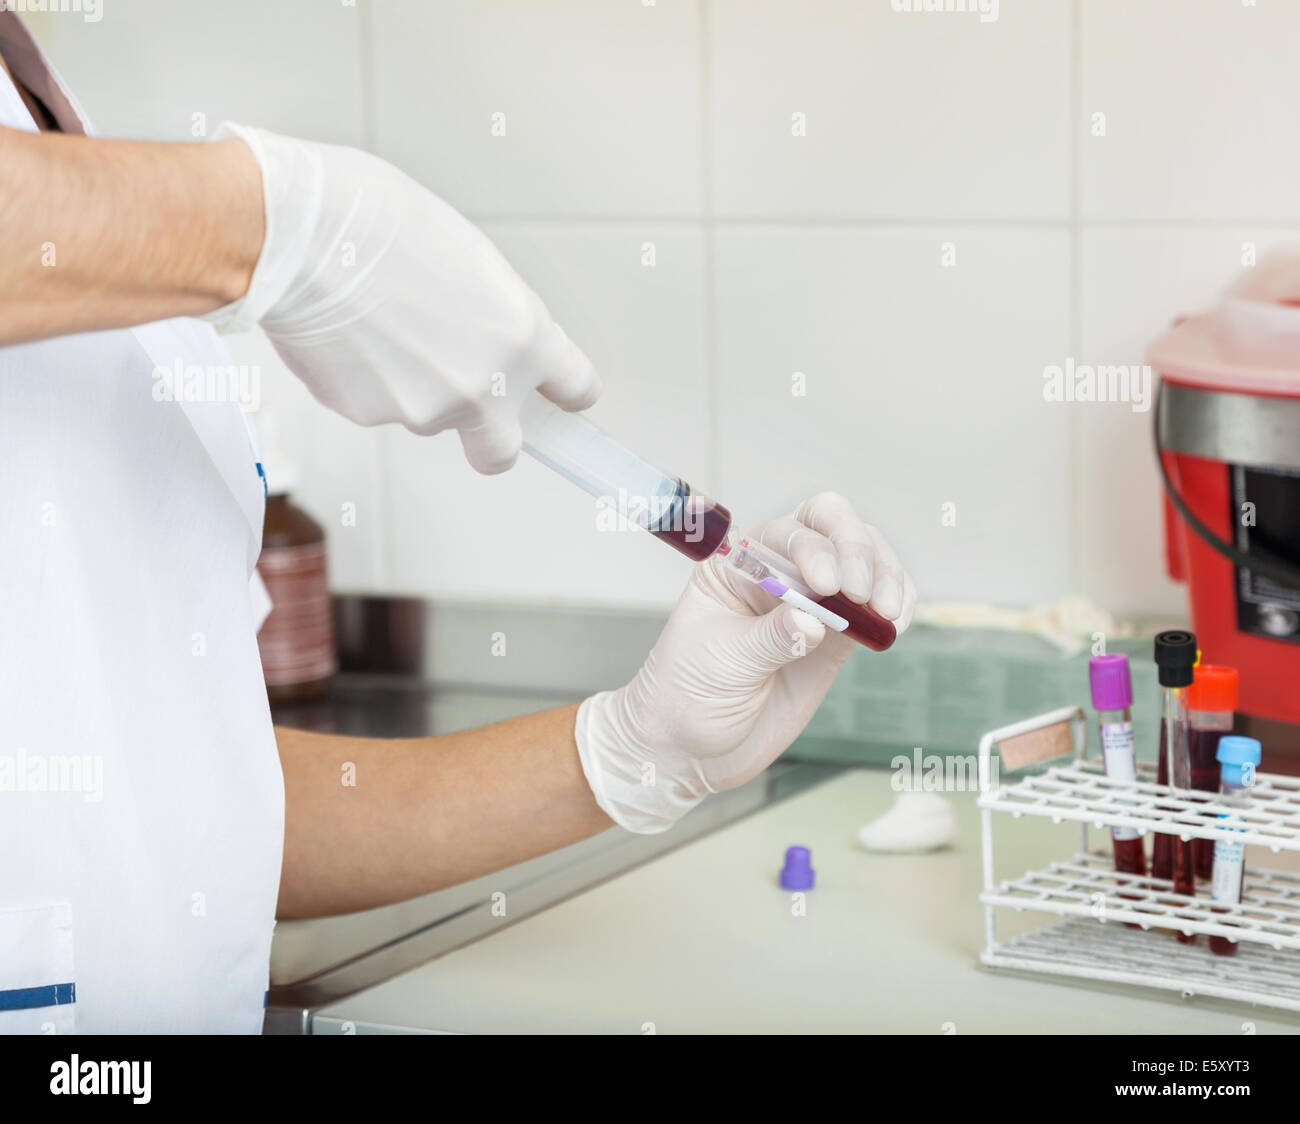 Technician Filling Blood Sample In Test Tube Stock Photo